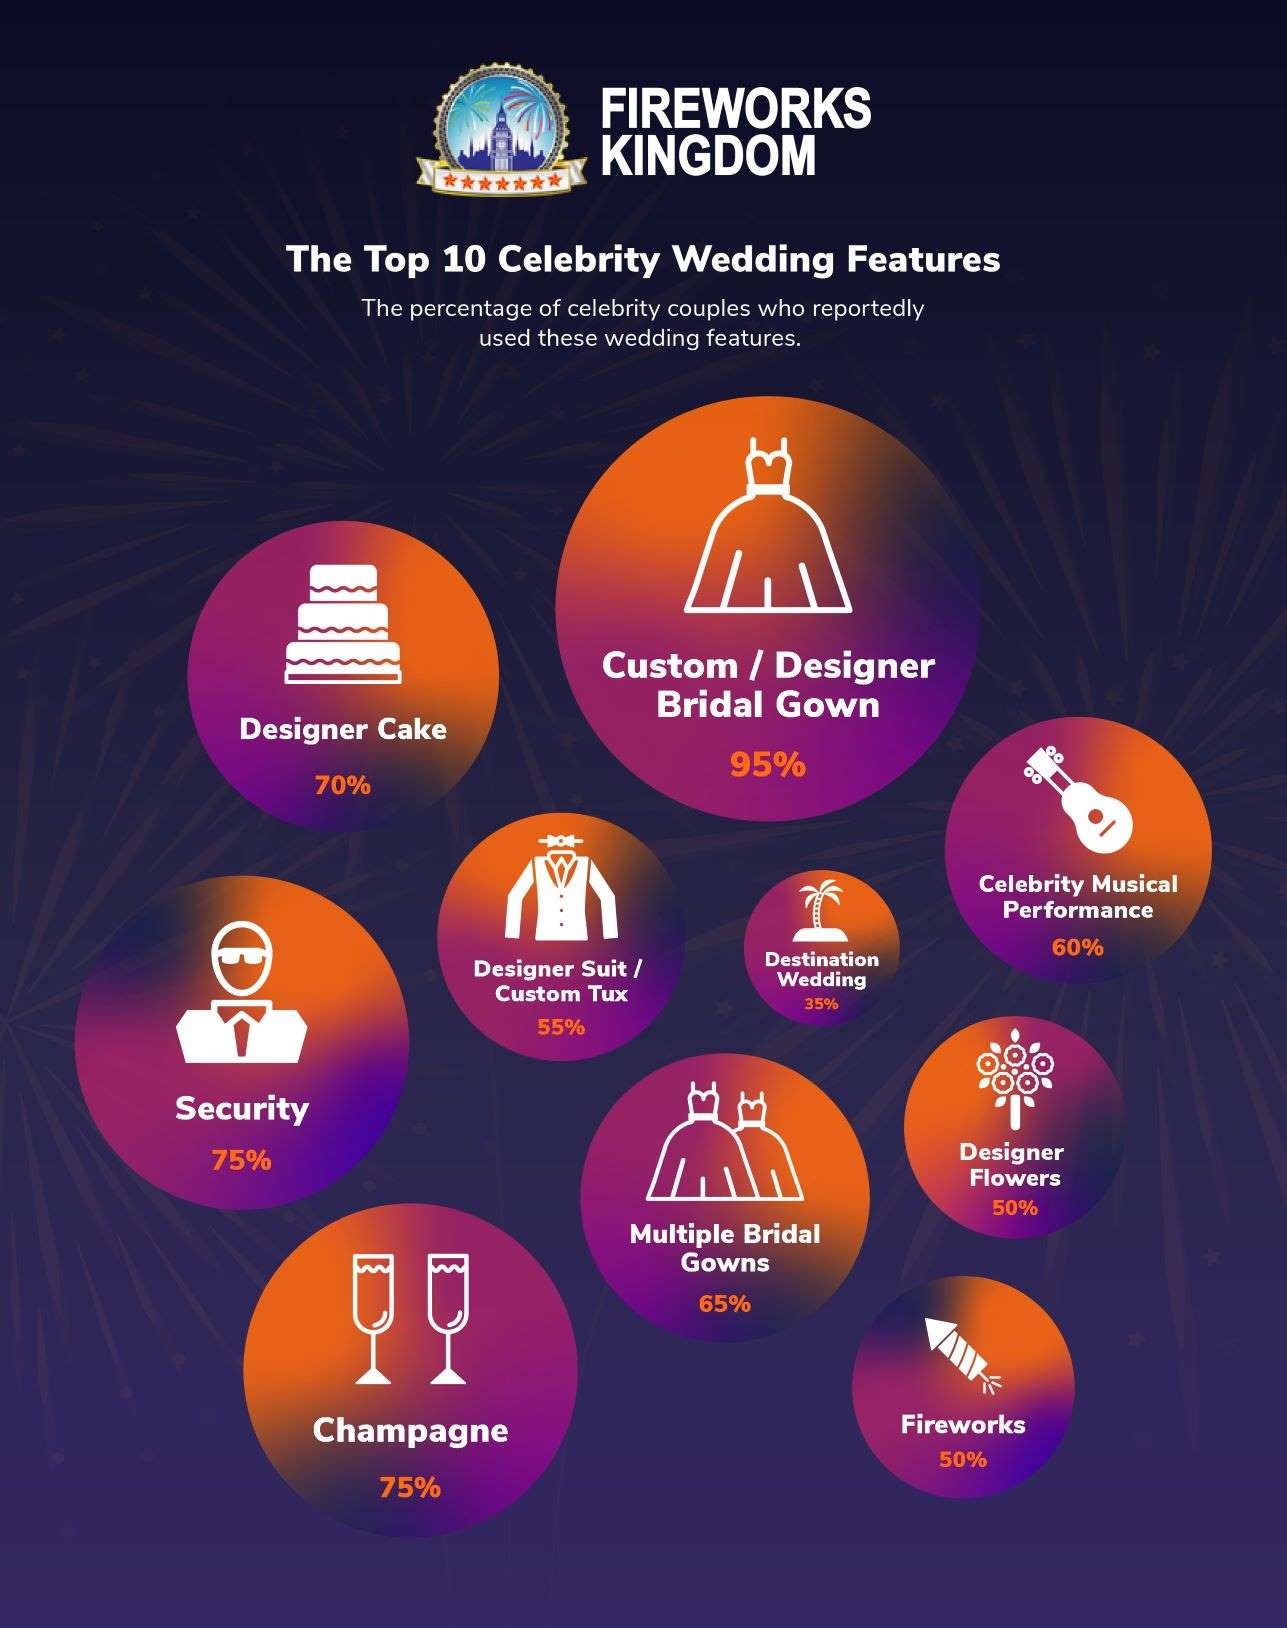 A bubble chart of the top 10 celebrity wedding features.